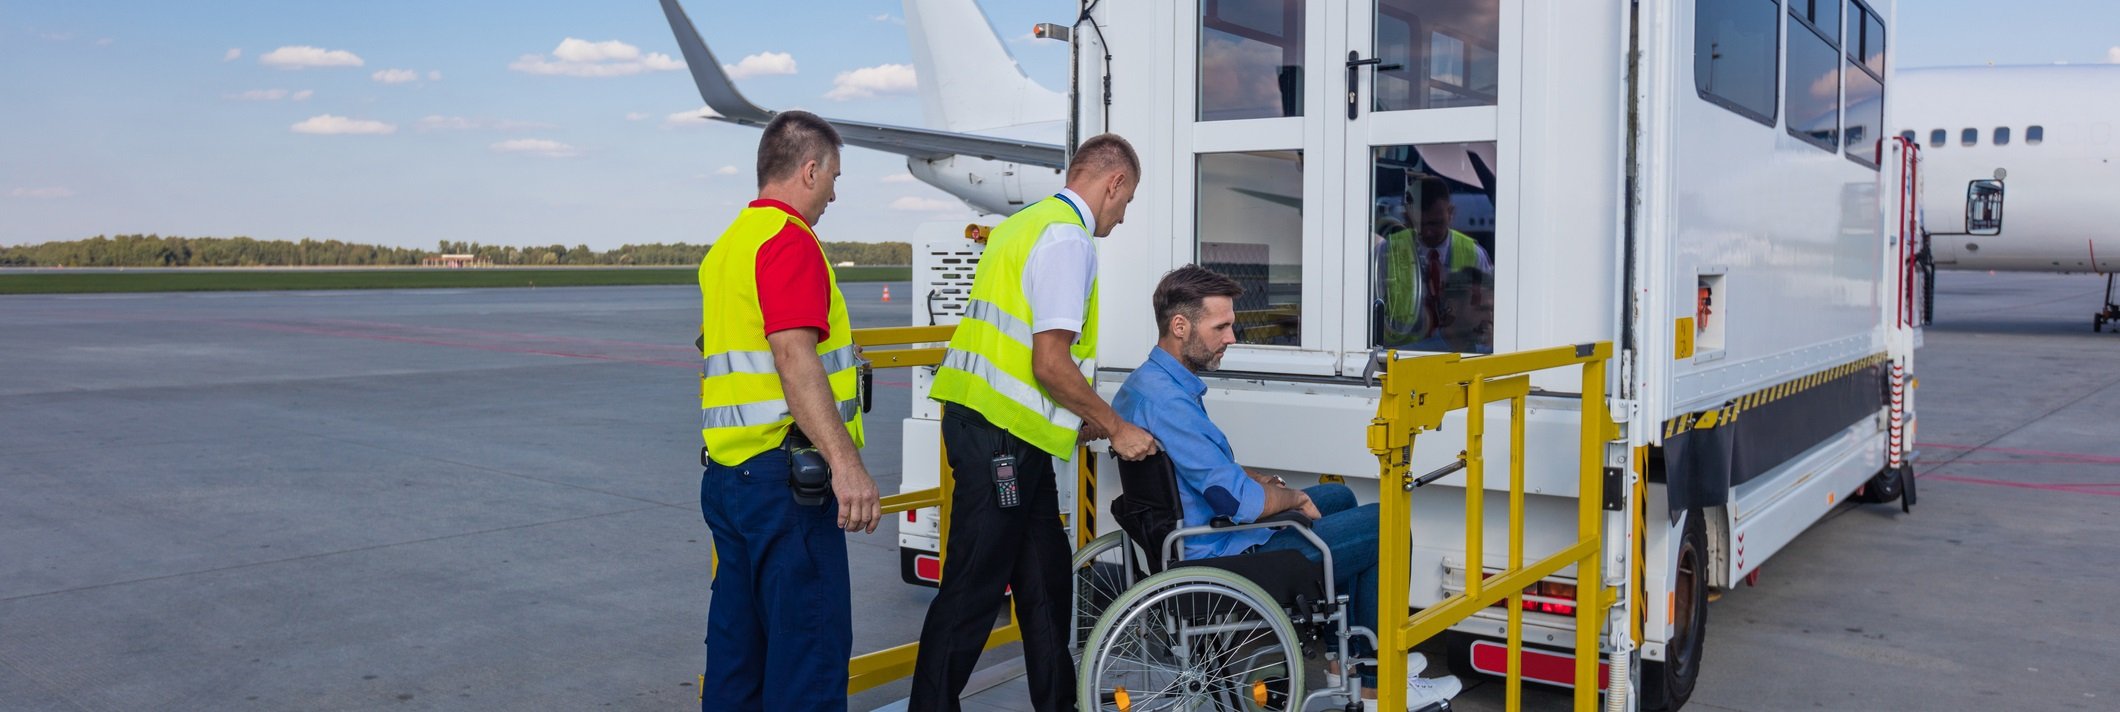 Wheelchair damage or loss during air transportation